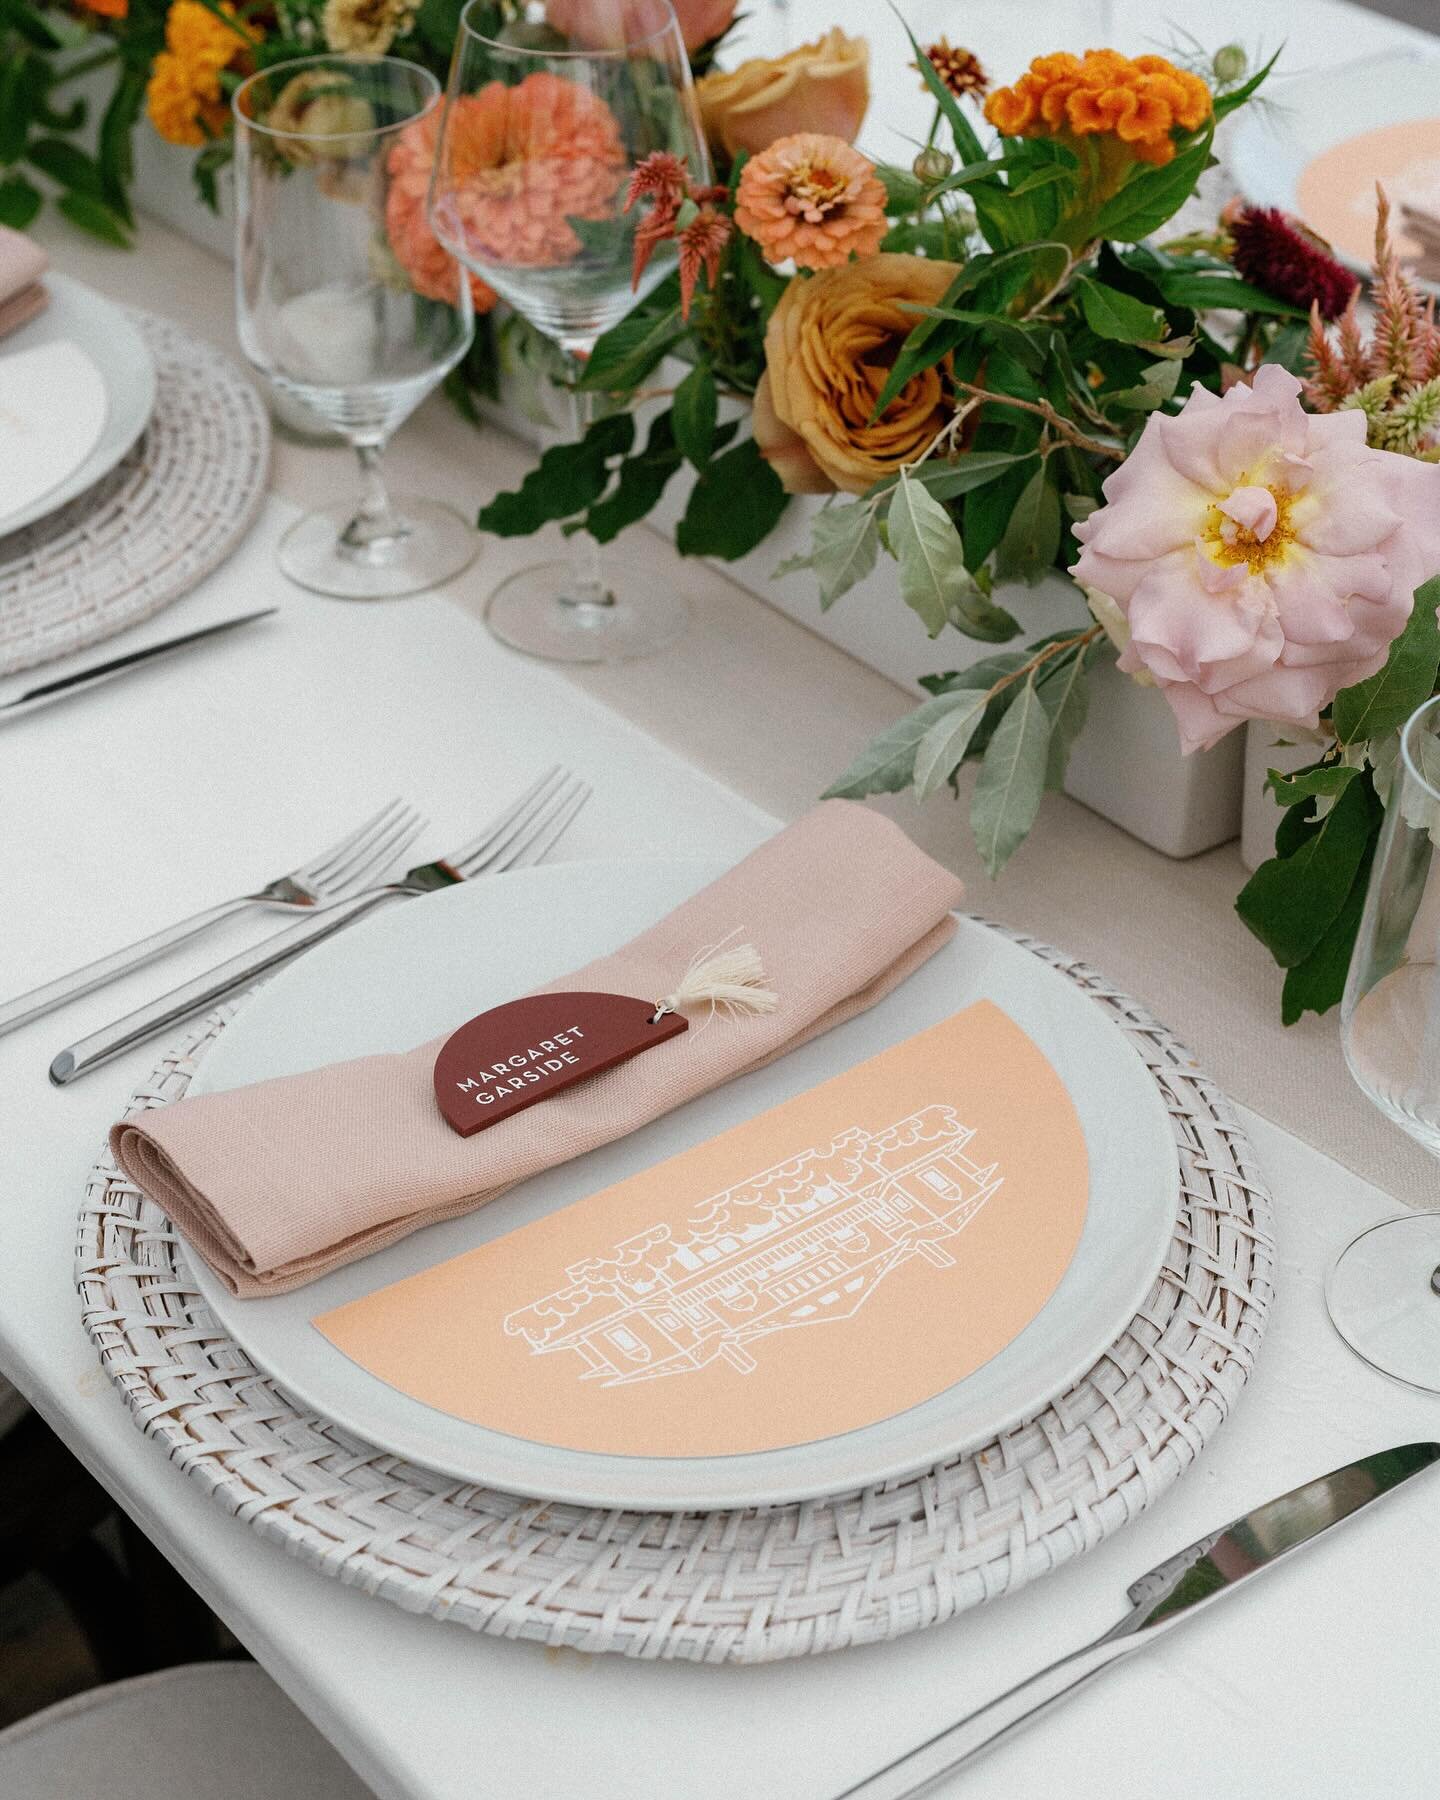 A cohesive design with personal touches is an essential part of a successful event.  At PMP, we take time getting to understand your story and style before presenting you with a plan that brings everything together in arresting fashion.

Photo // @je